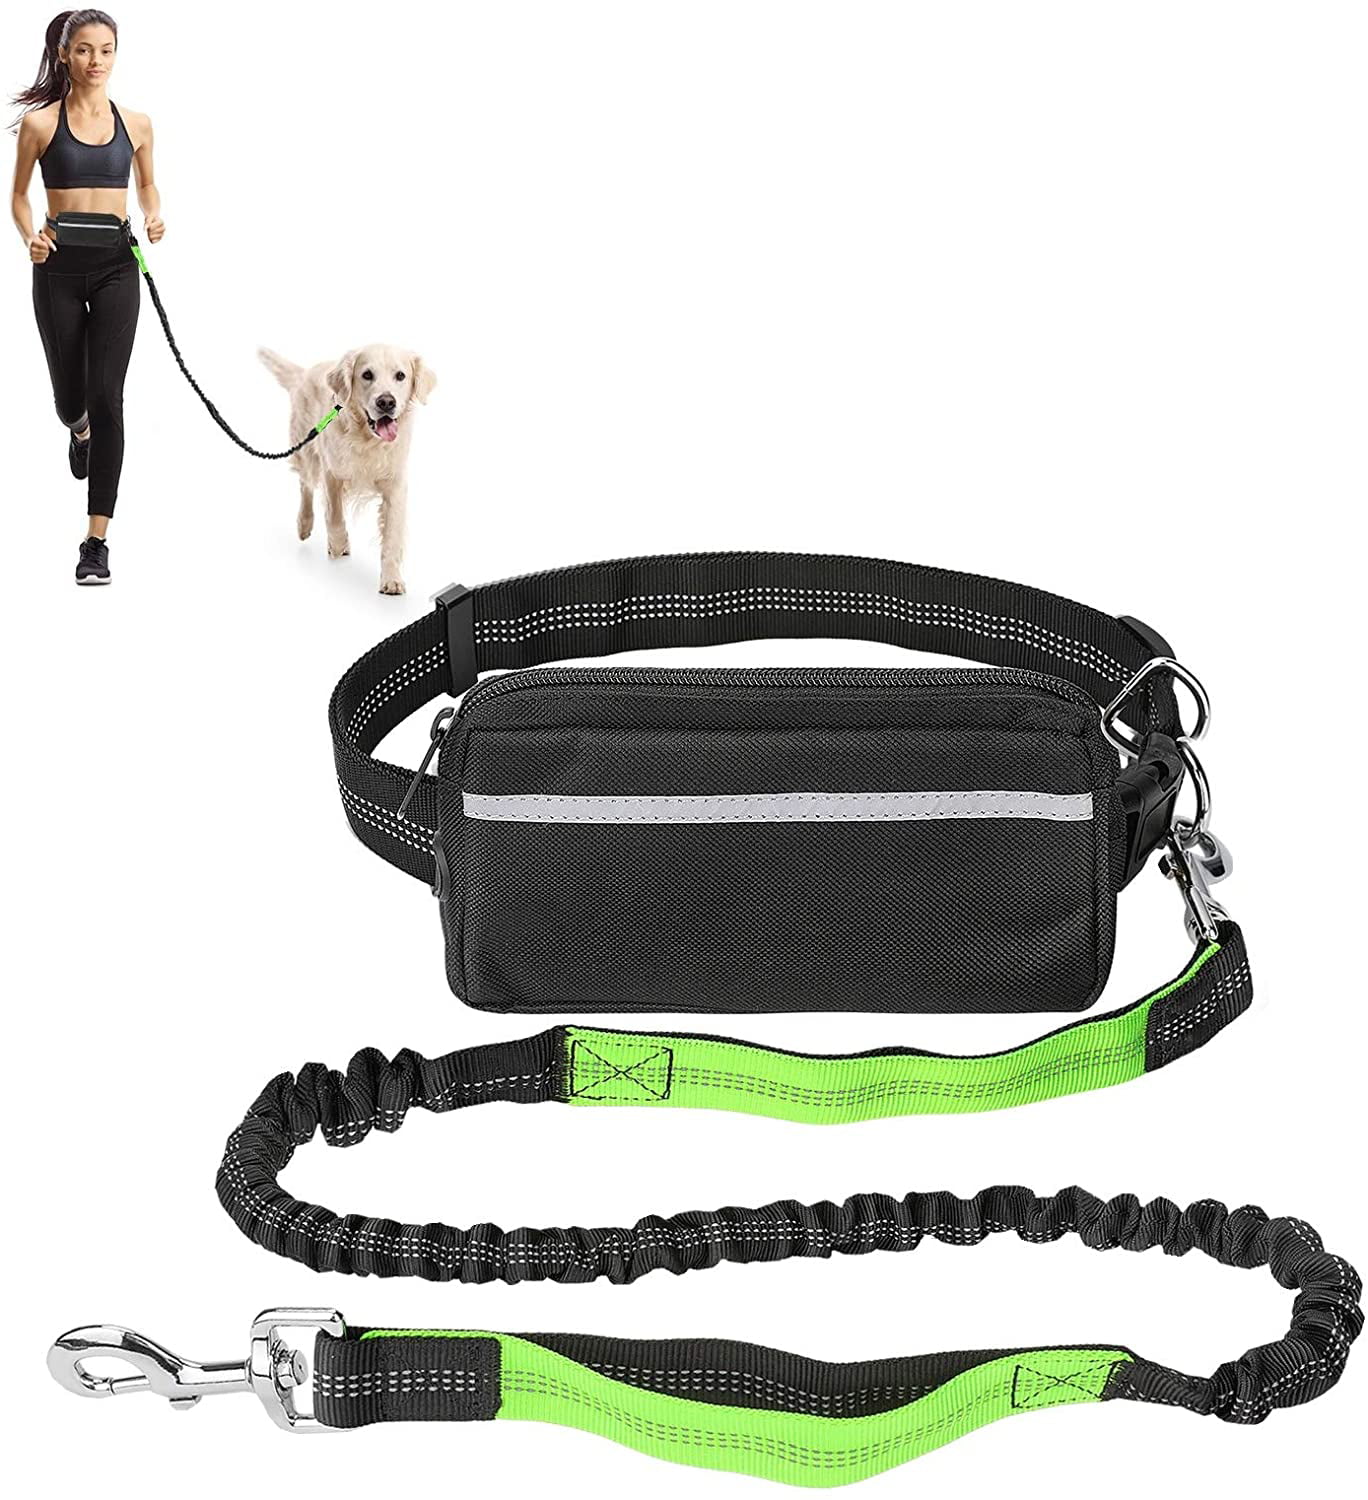 Training Green Adjustable Waist Belt with Zipper Bag Walking Up to 33 Ib Dog Waist Leash for Running CestMall Dog Running Leash Hands Free Dog Leash for Small and Medium Dog Reflective Stitches 